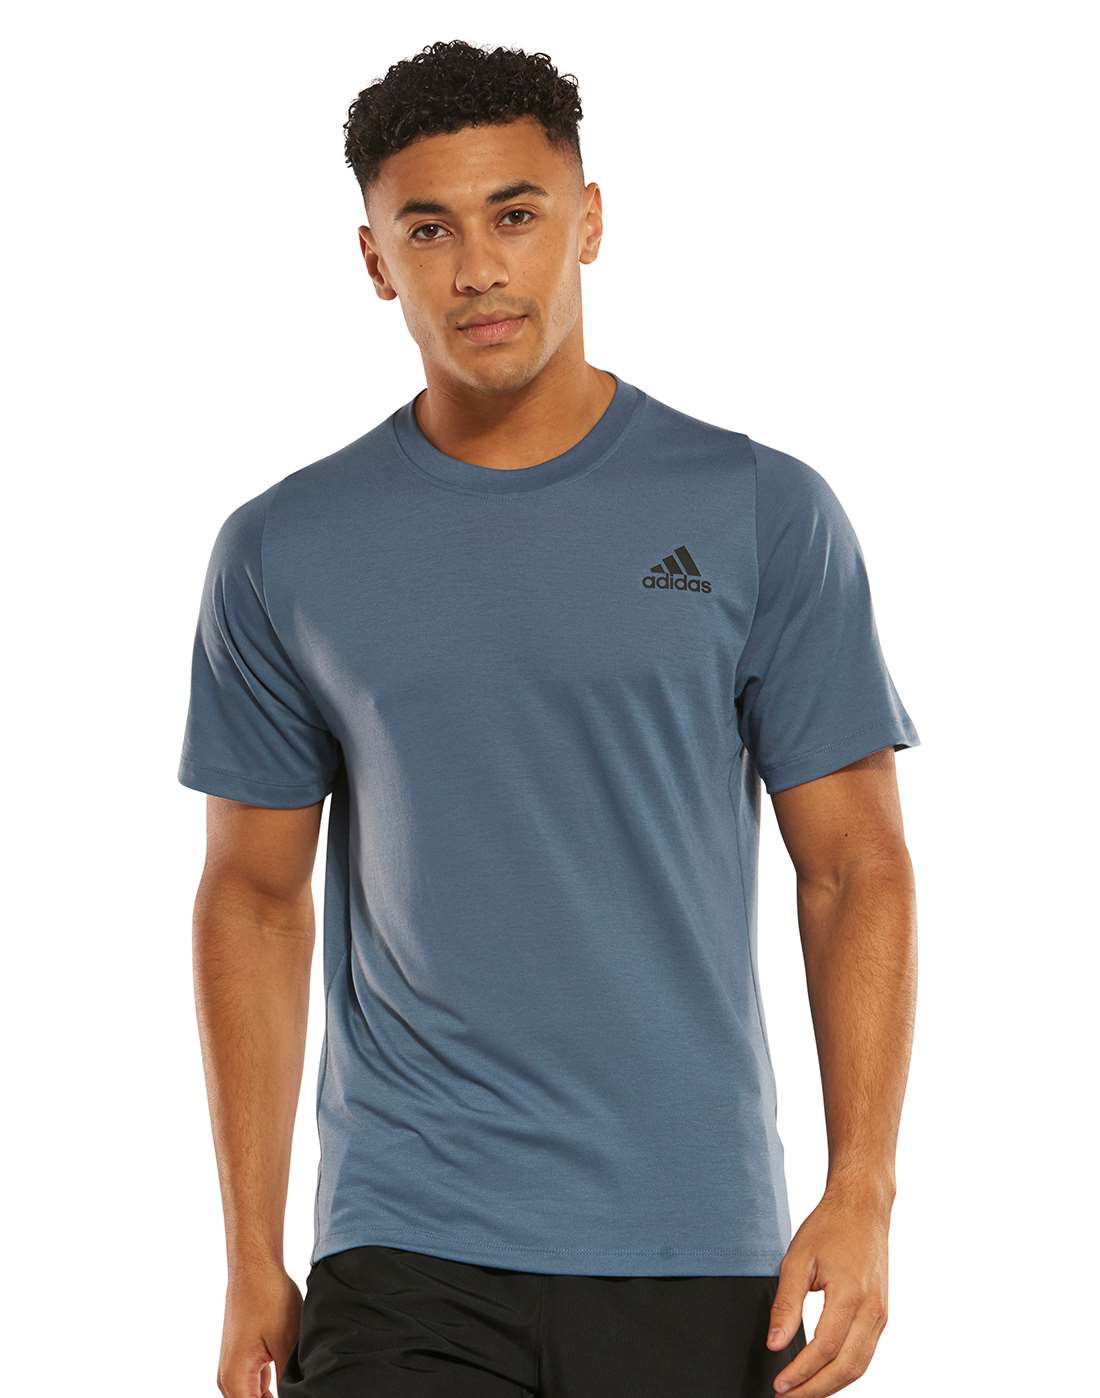 Adidas ClimaLite V-neck Ultimate Short Sleeve Workout Shirt Gray Size Small  - $23 - From Krystle